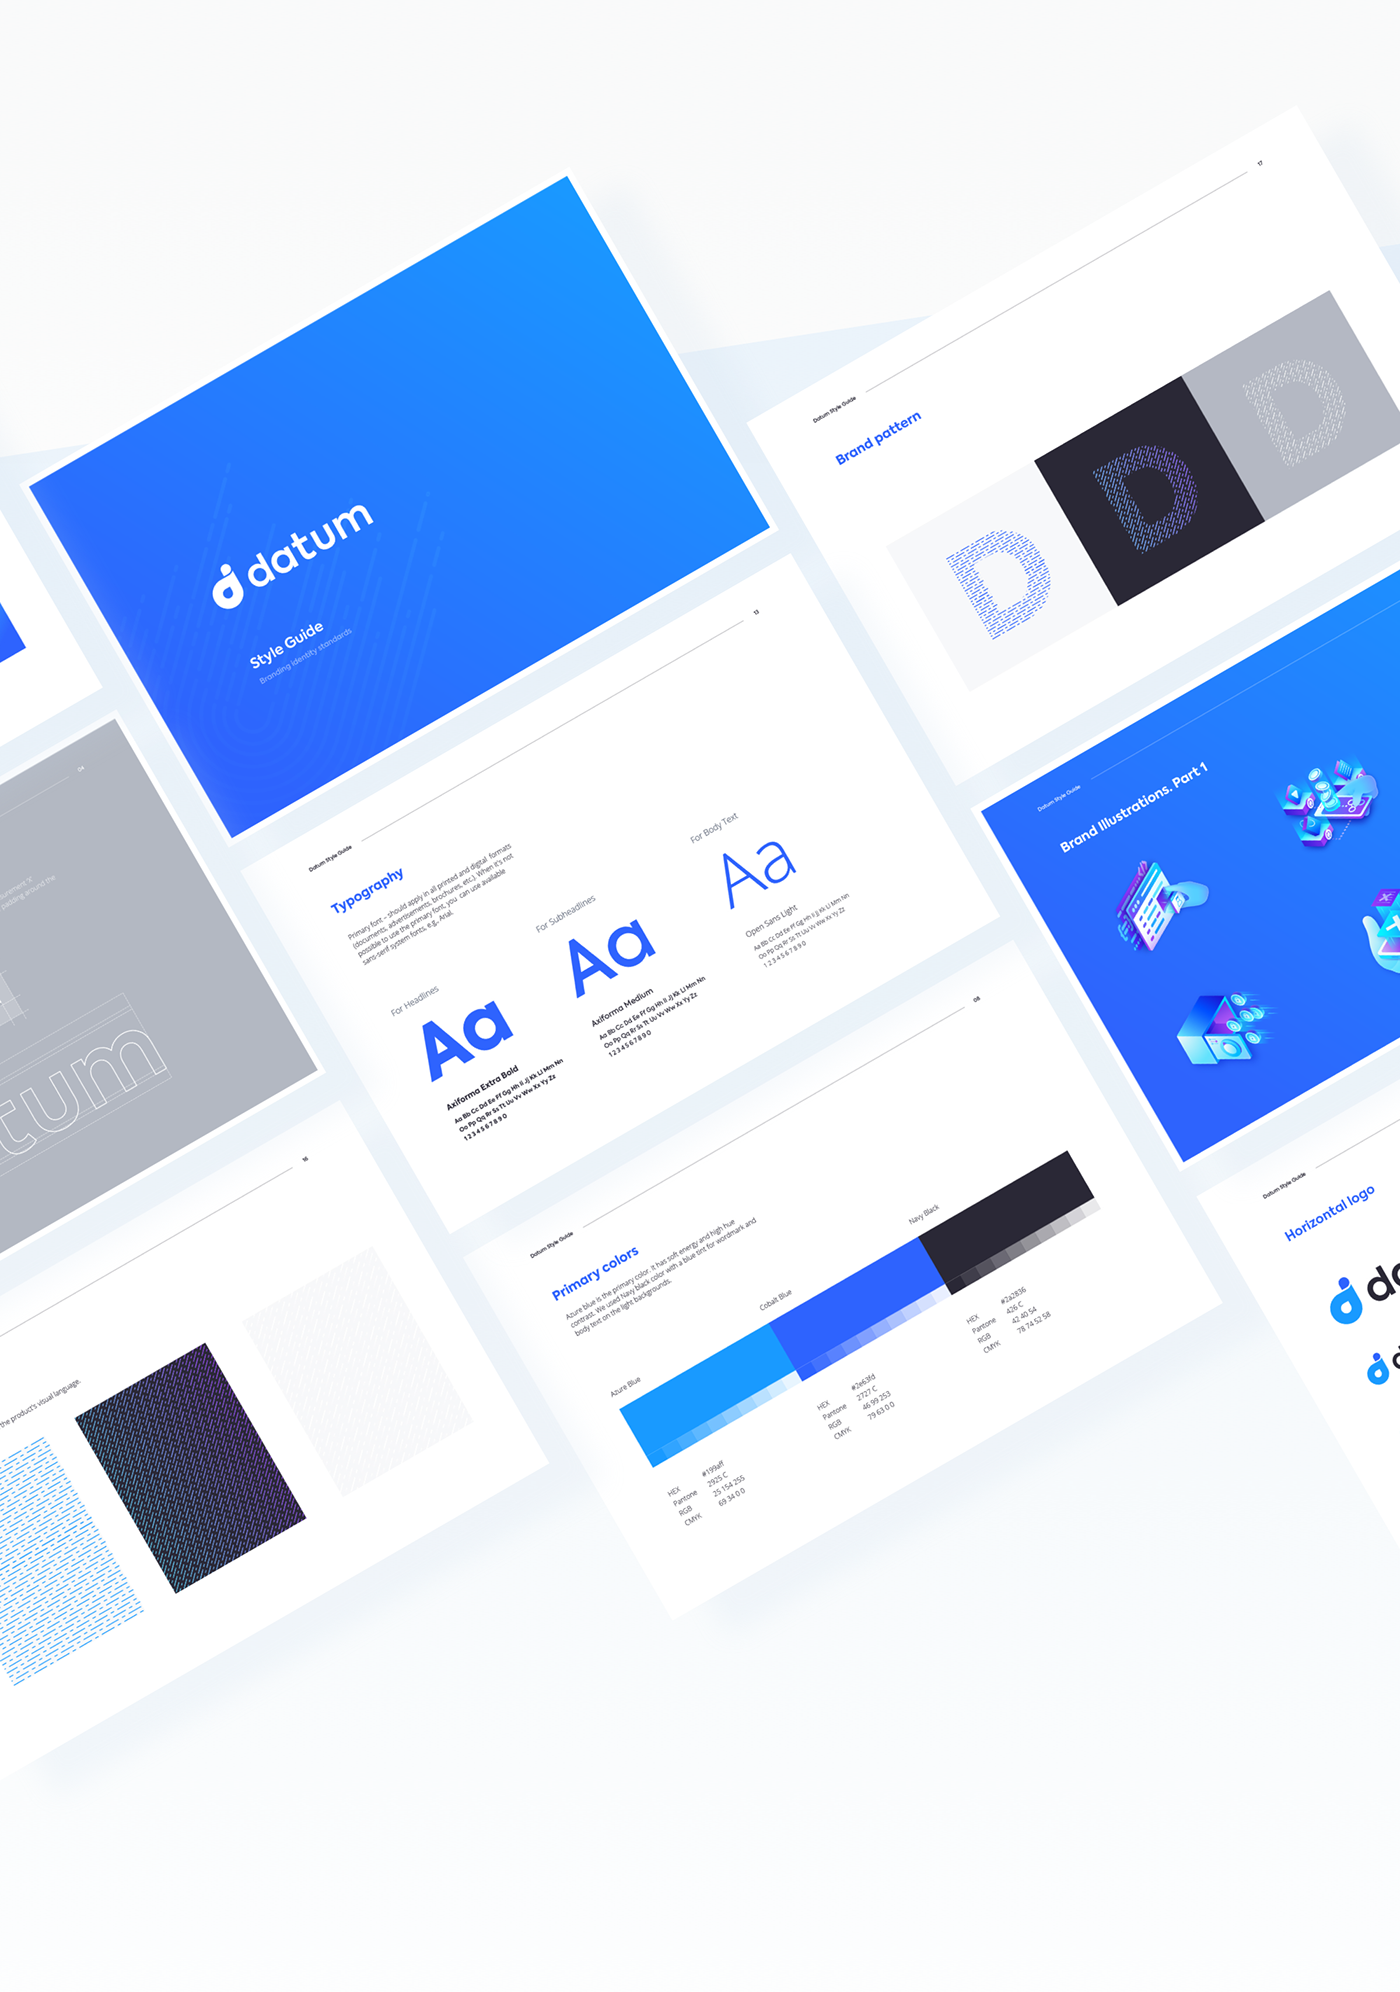 Identity Design interface design branding  logo sketches crypto currency Blockchain Landing Page motion study marketing website UX UI Mobile Application